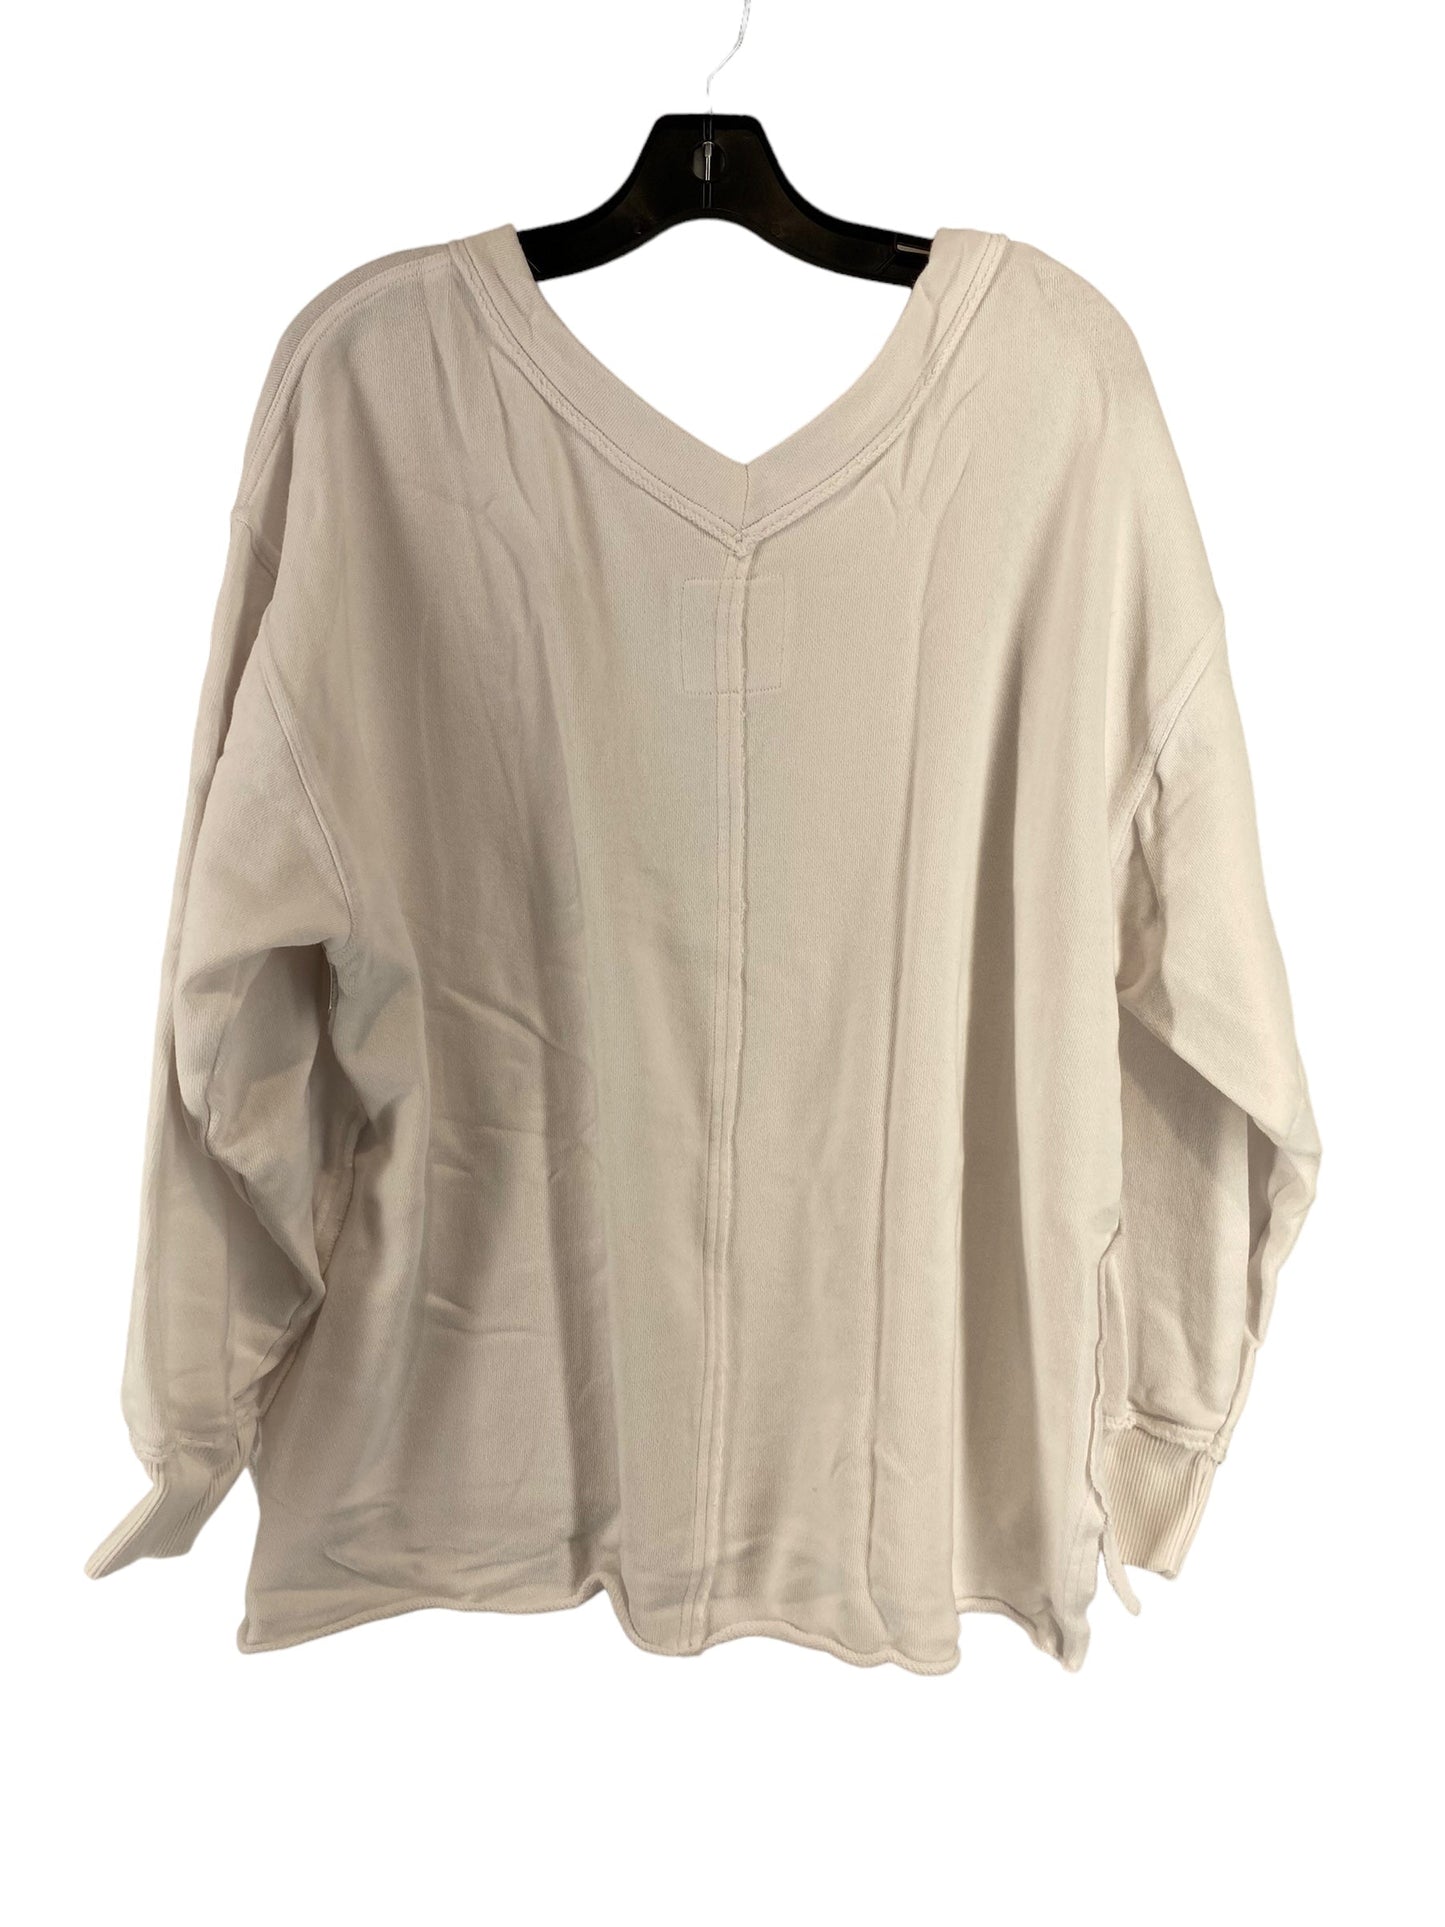 White Top Long Sleeve Aerie, Size M